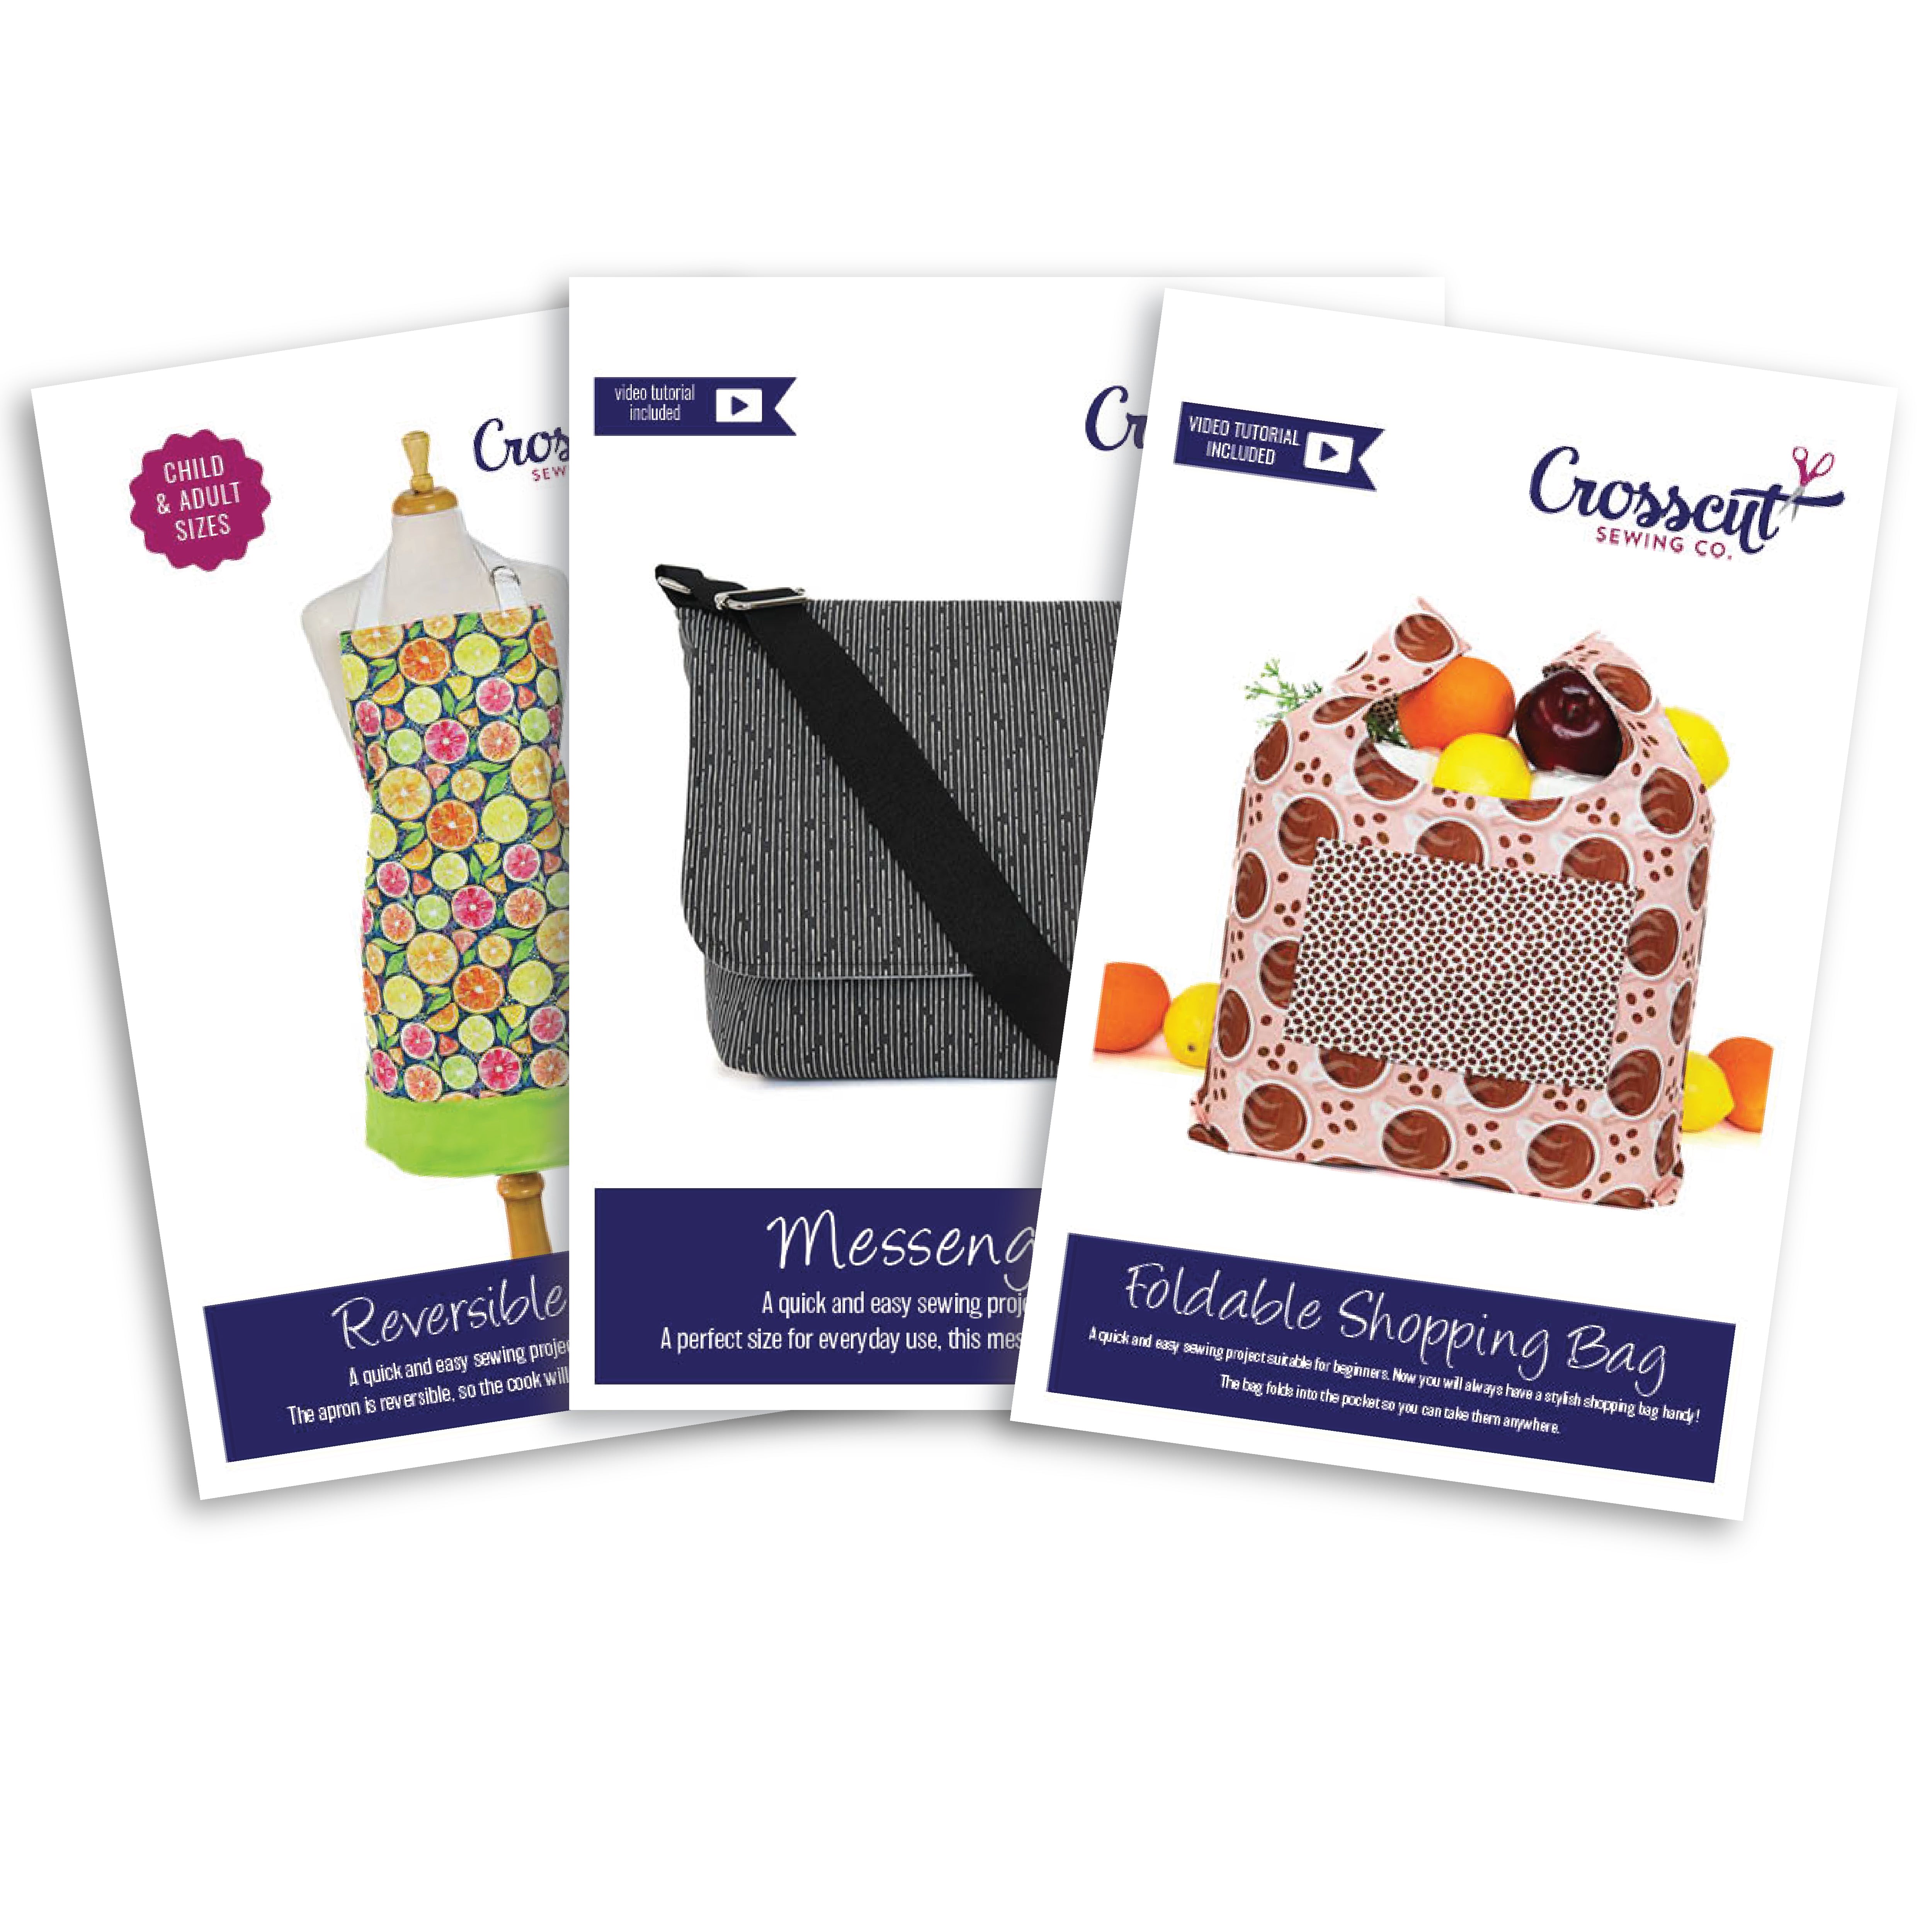 Best Sellers Sewing Kit Bundle - Apron, Messenger Bag and Shopping Tote